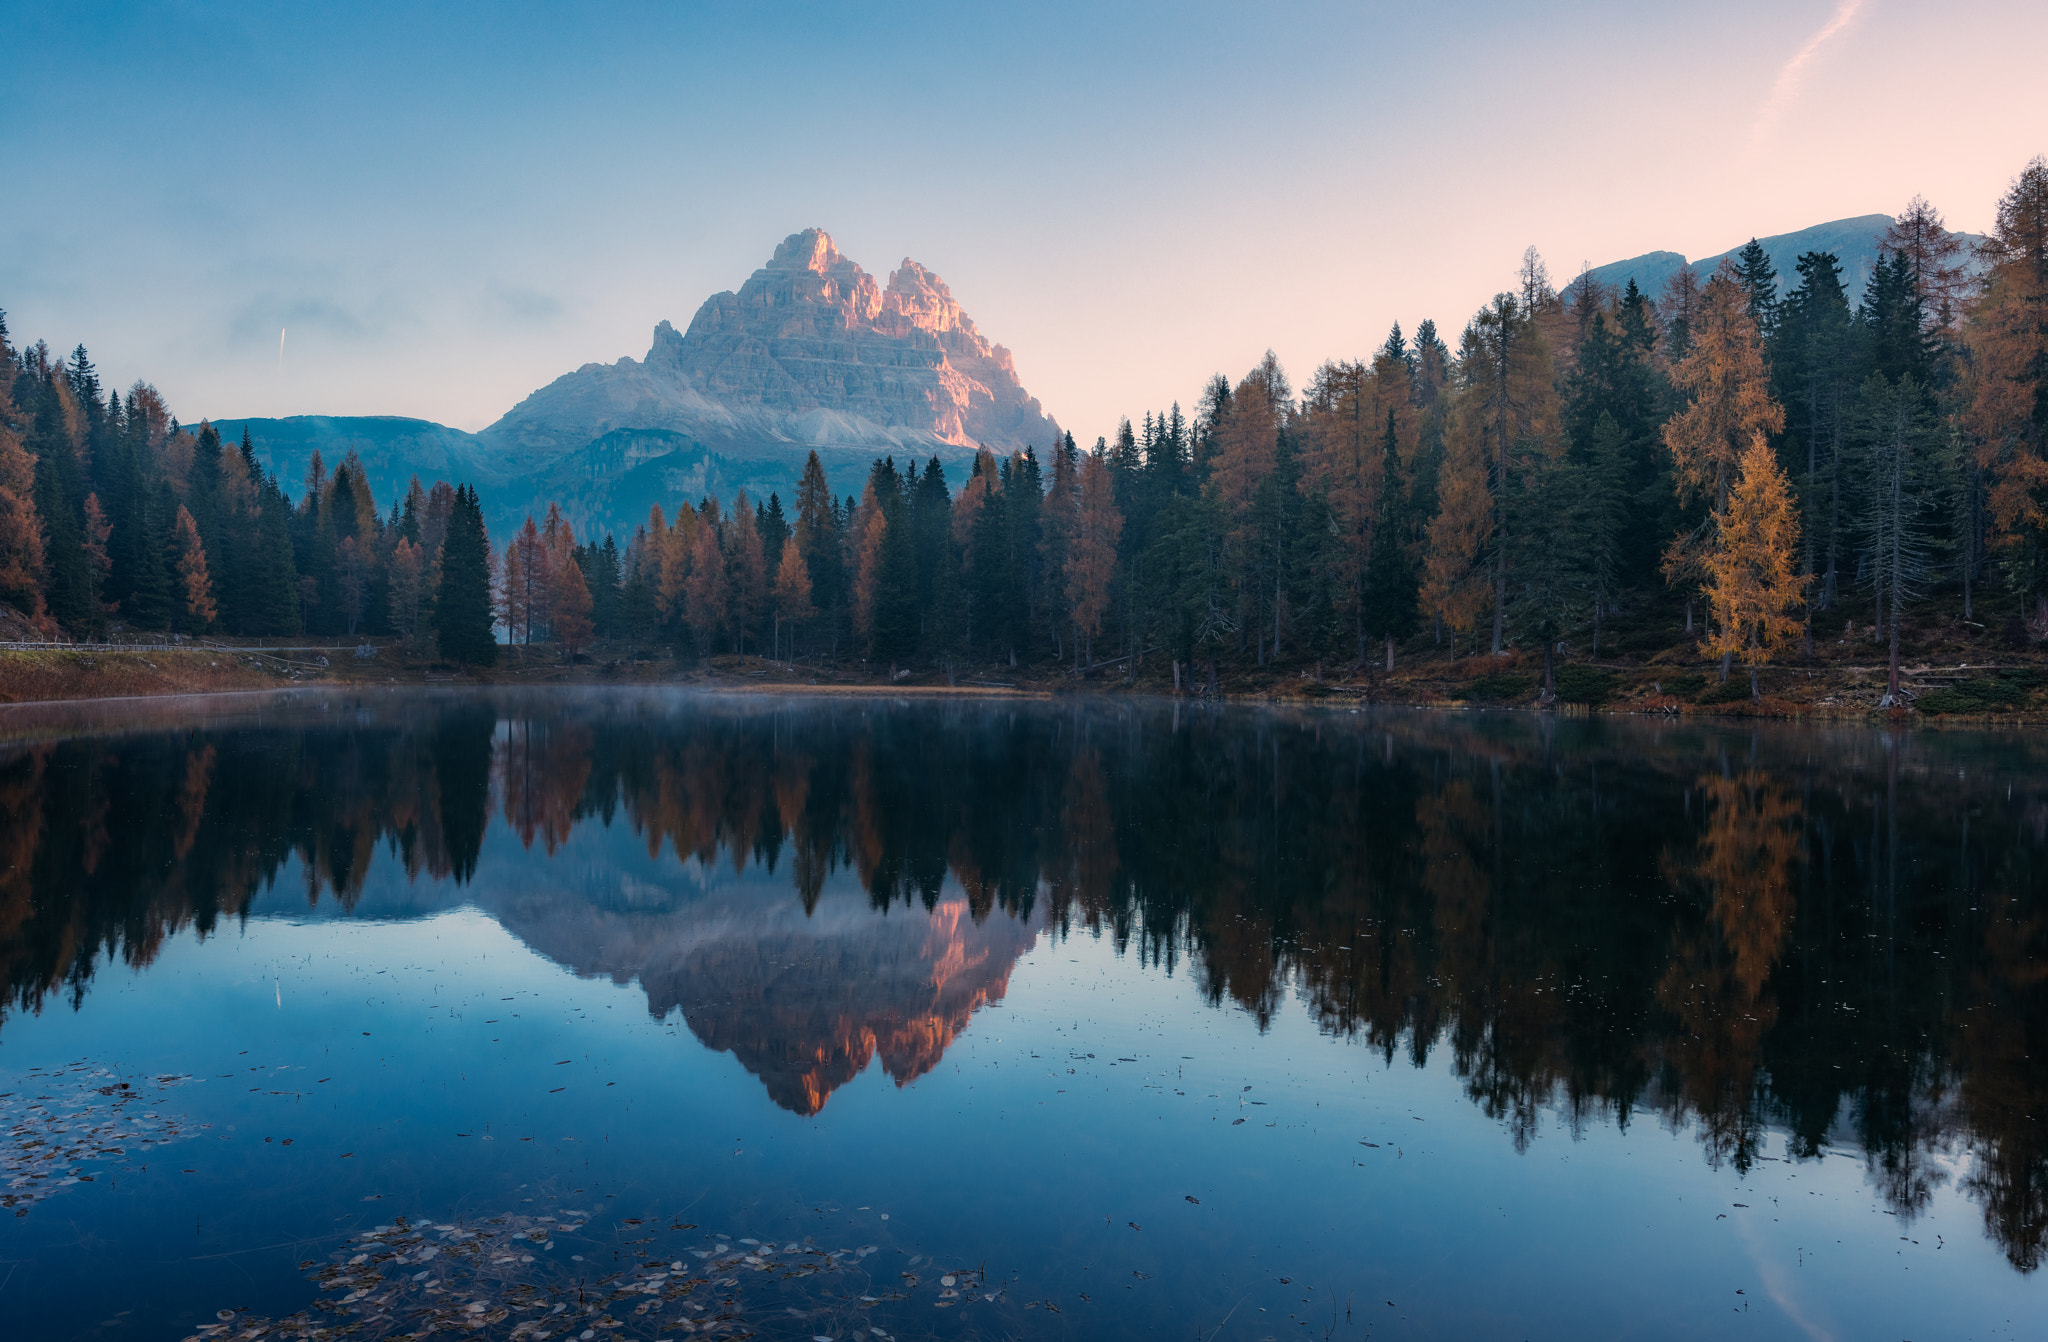 General 2048x1342 500px landscape forest reflection photography lake mountains nature water trees sky sunlight natural light